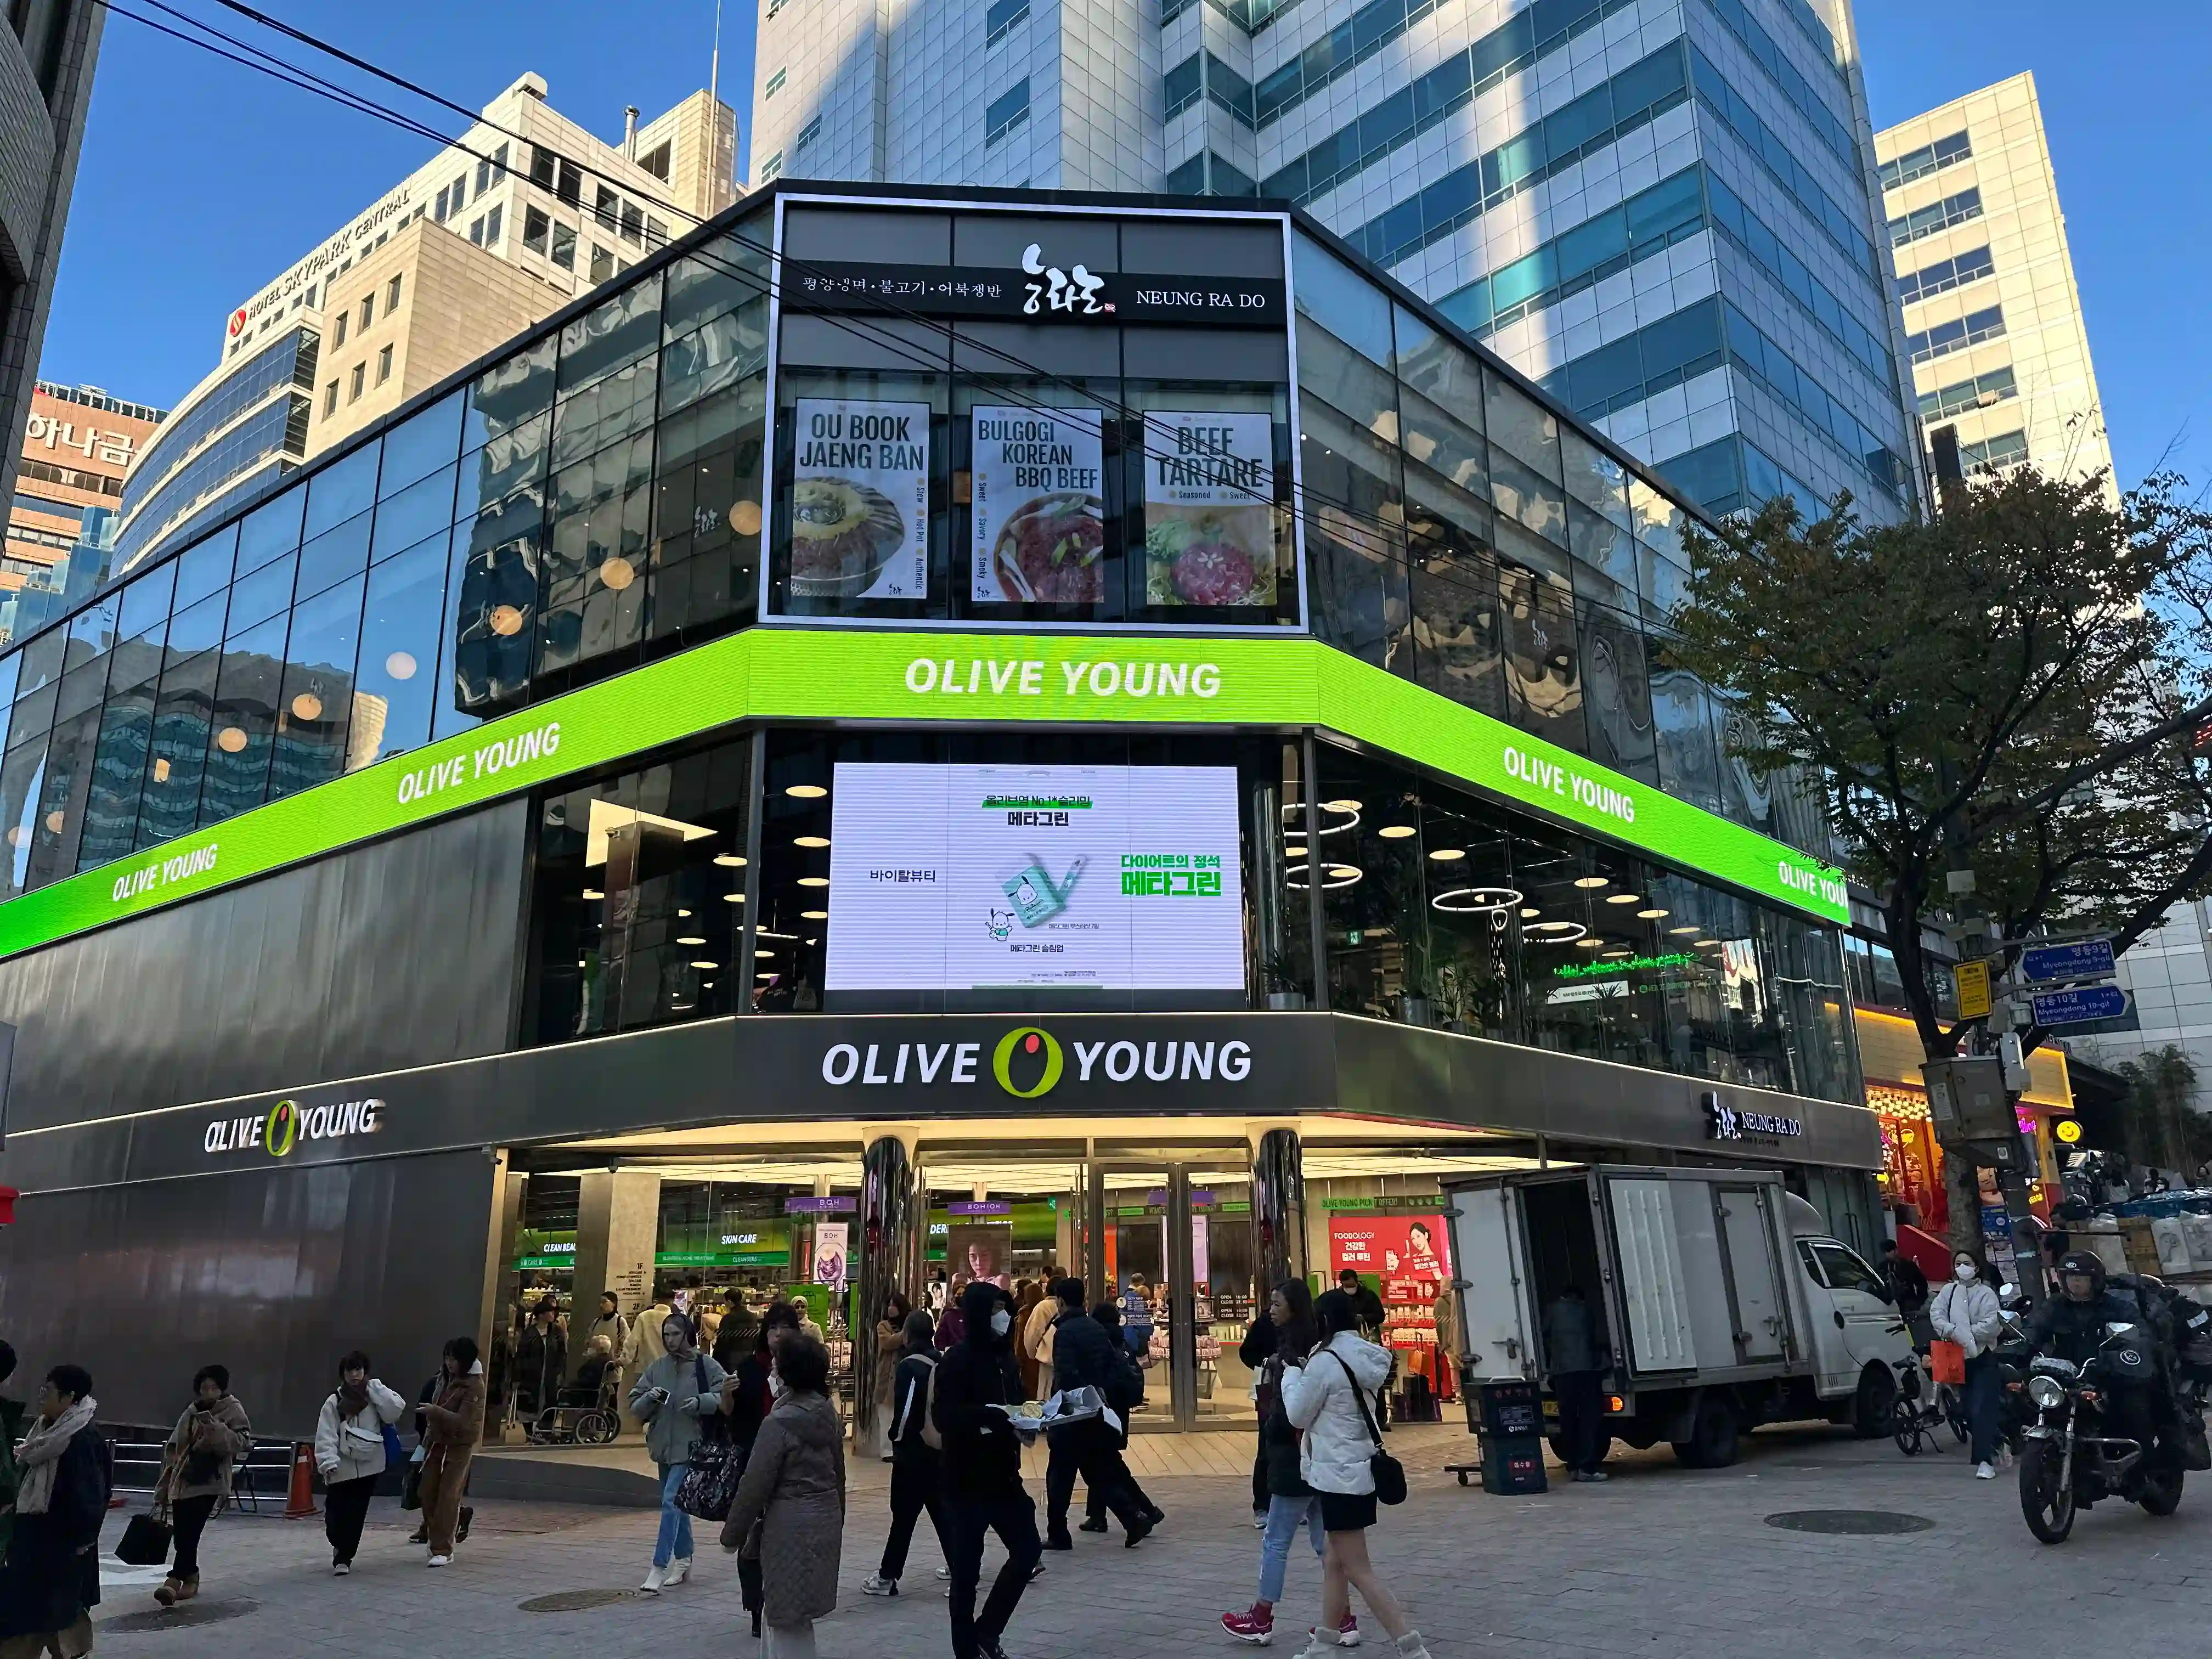 Olive Young Olive Young Myeongdong